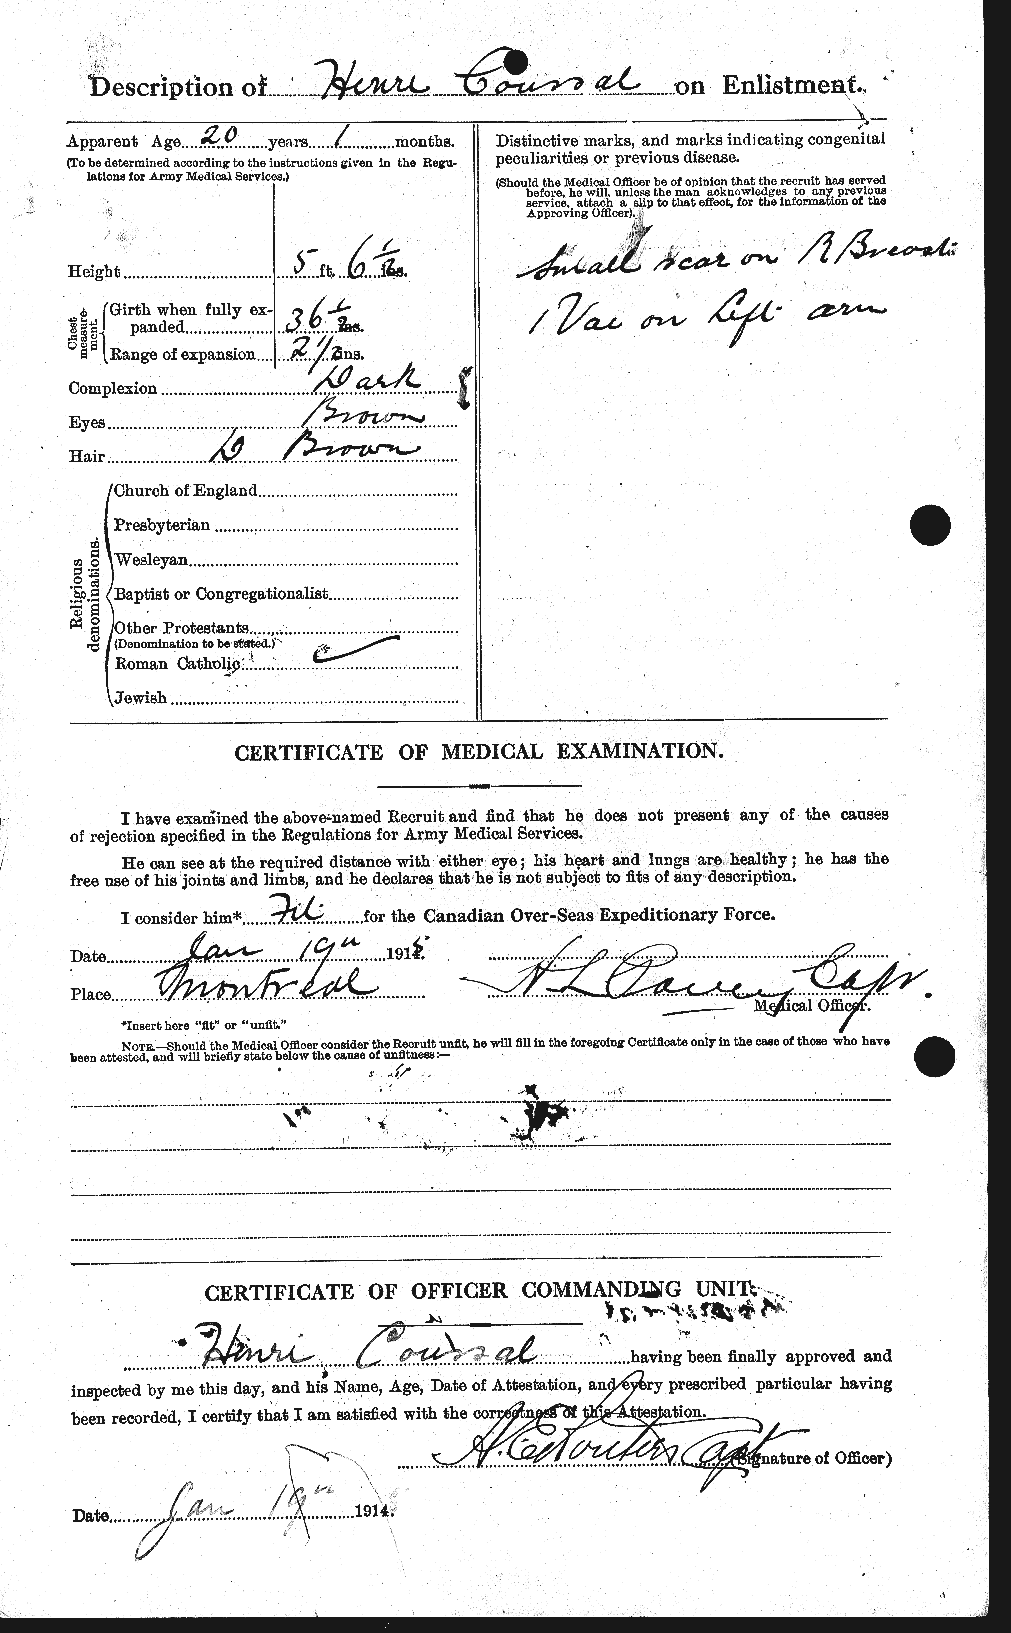 Personnel Records of the First World War - CEF 061896b